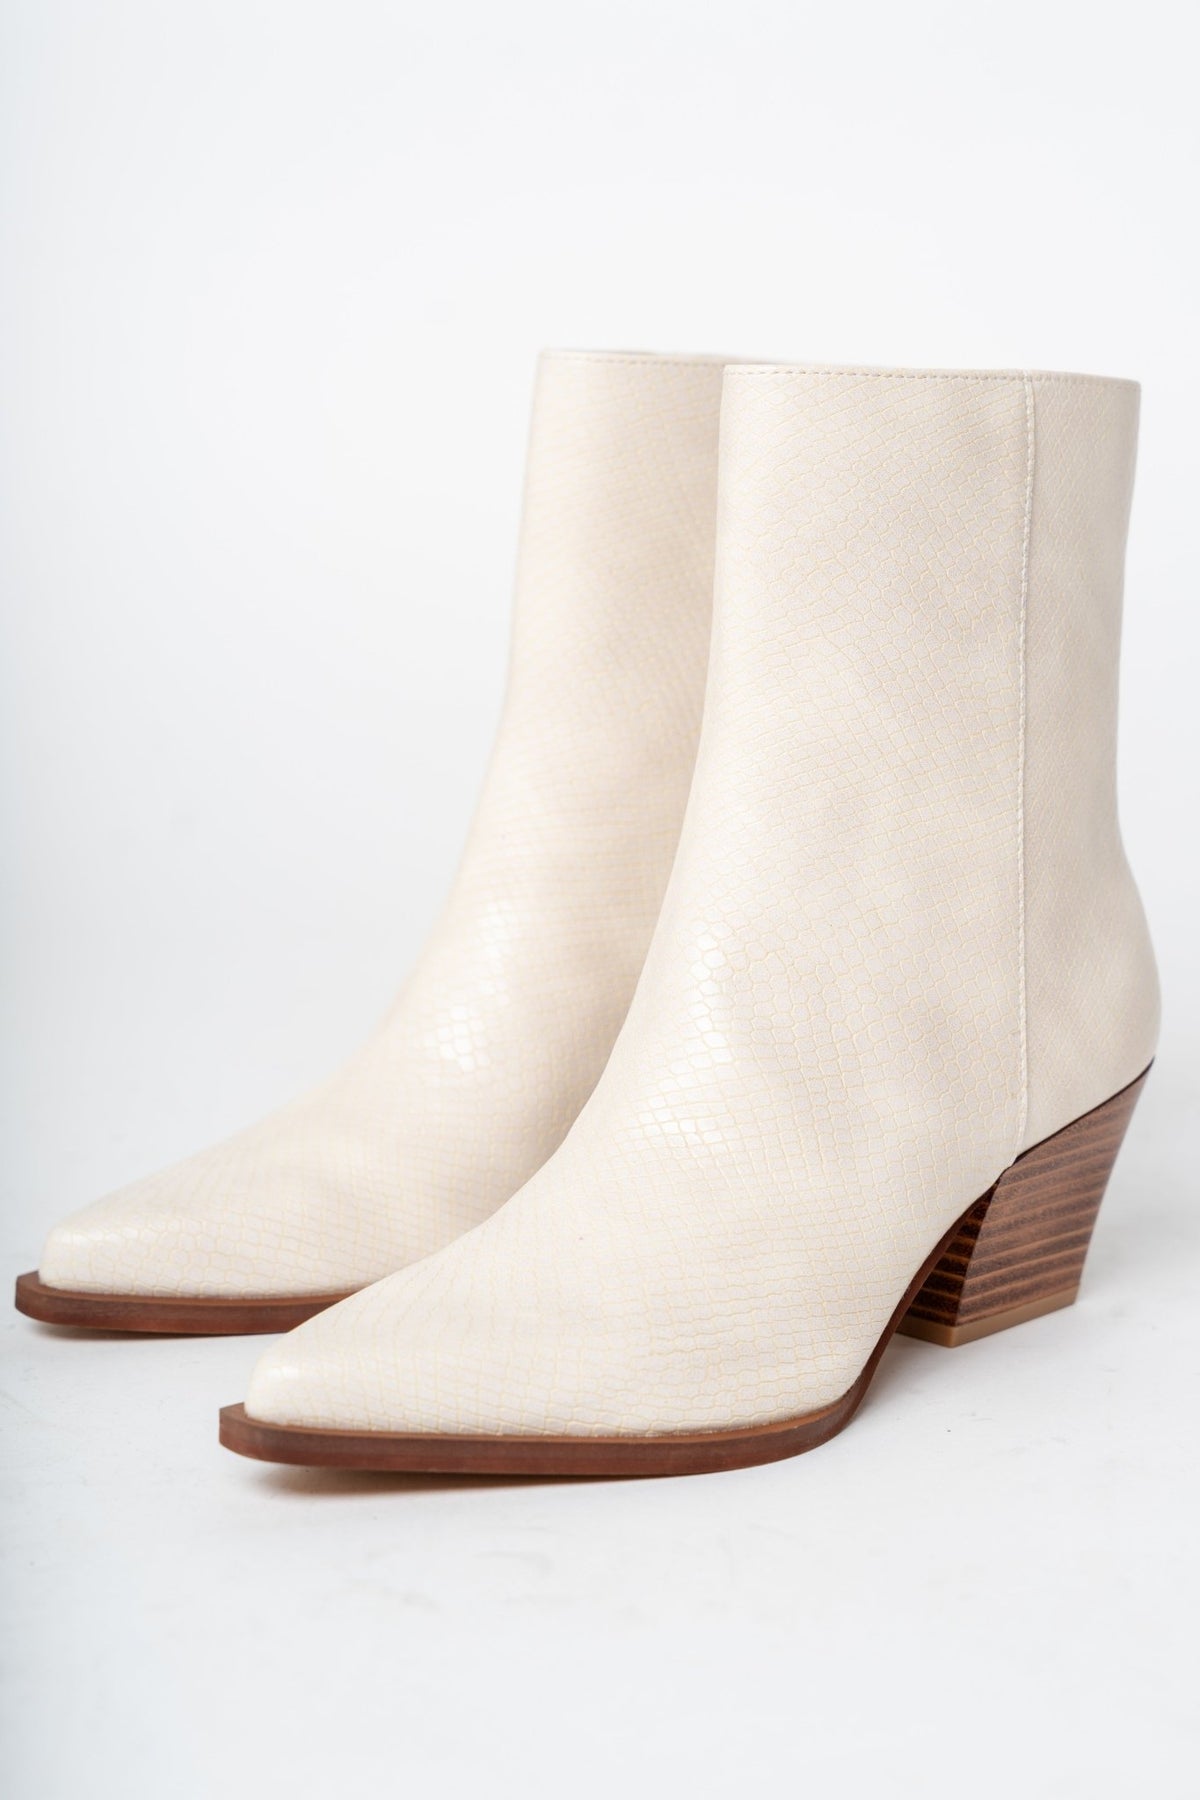 Miley alligator bootie beige - Cute shoes - Trendy Shoes at Lush Fashion Lounge Boutique in Oklahoma City